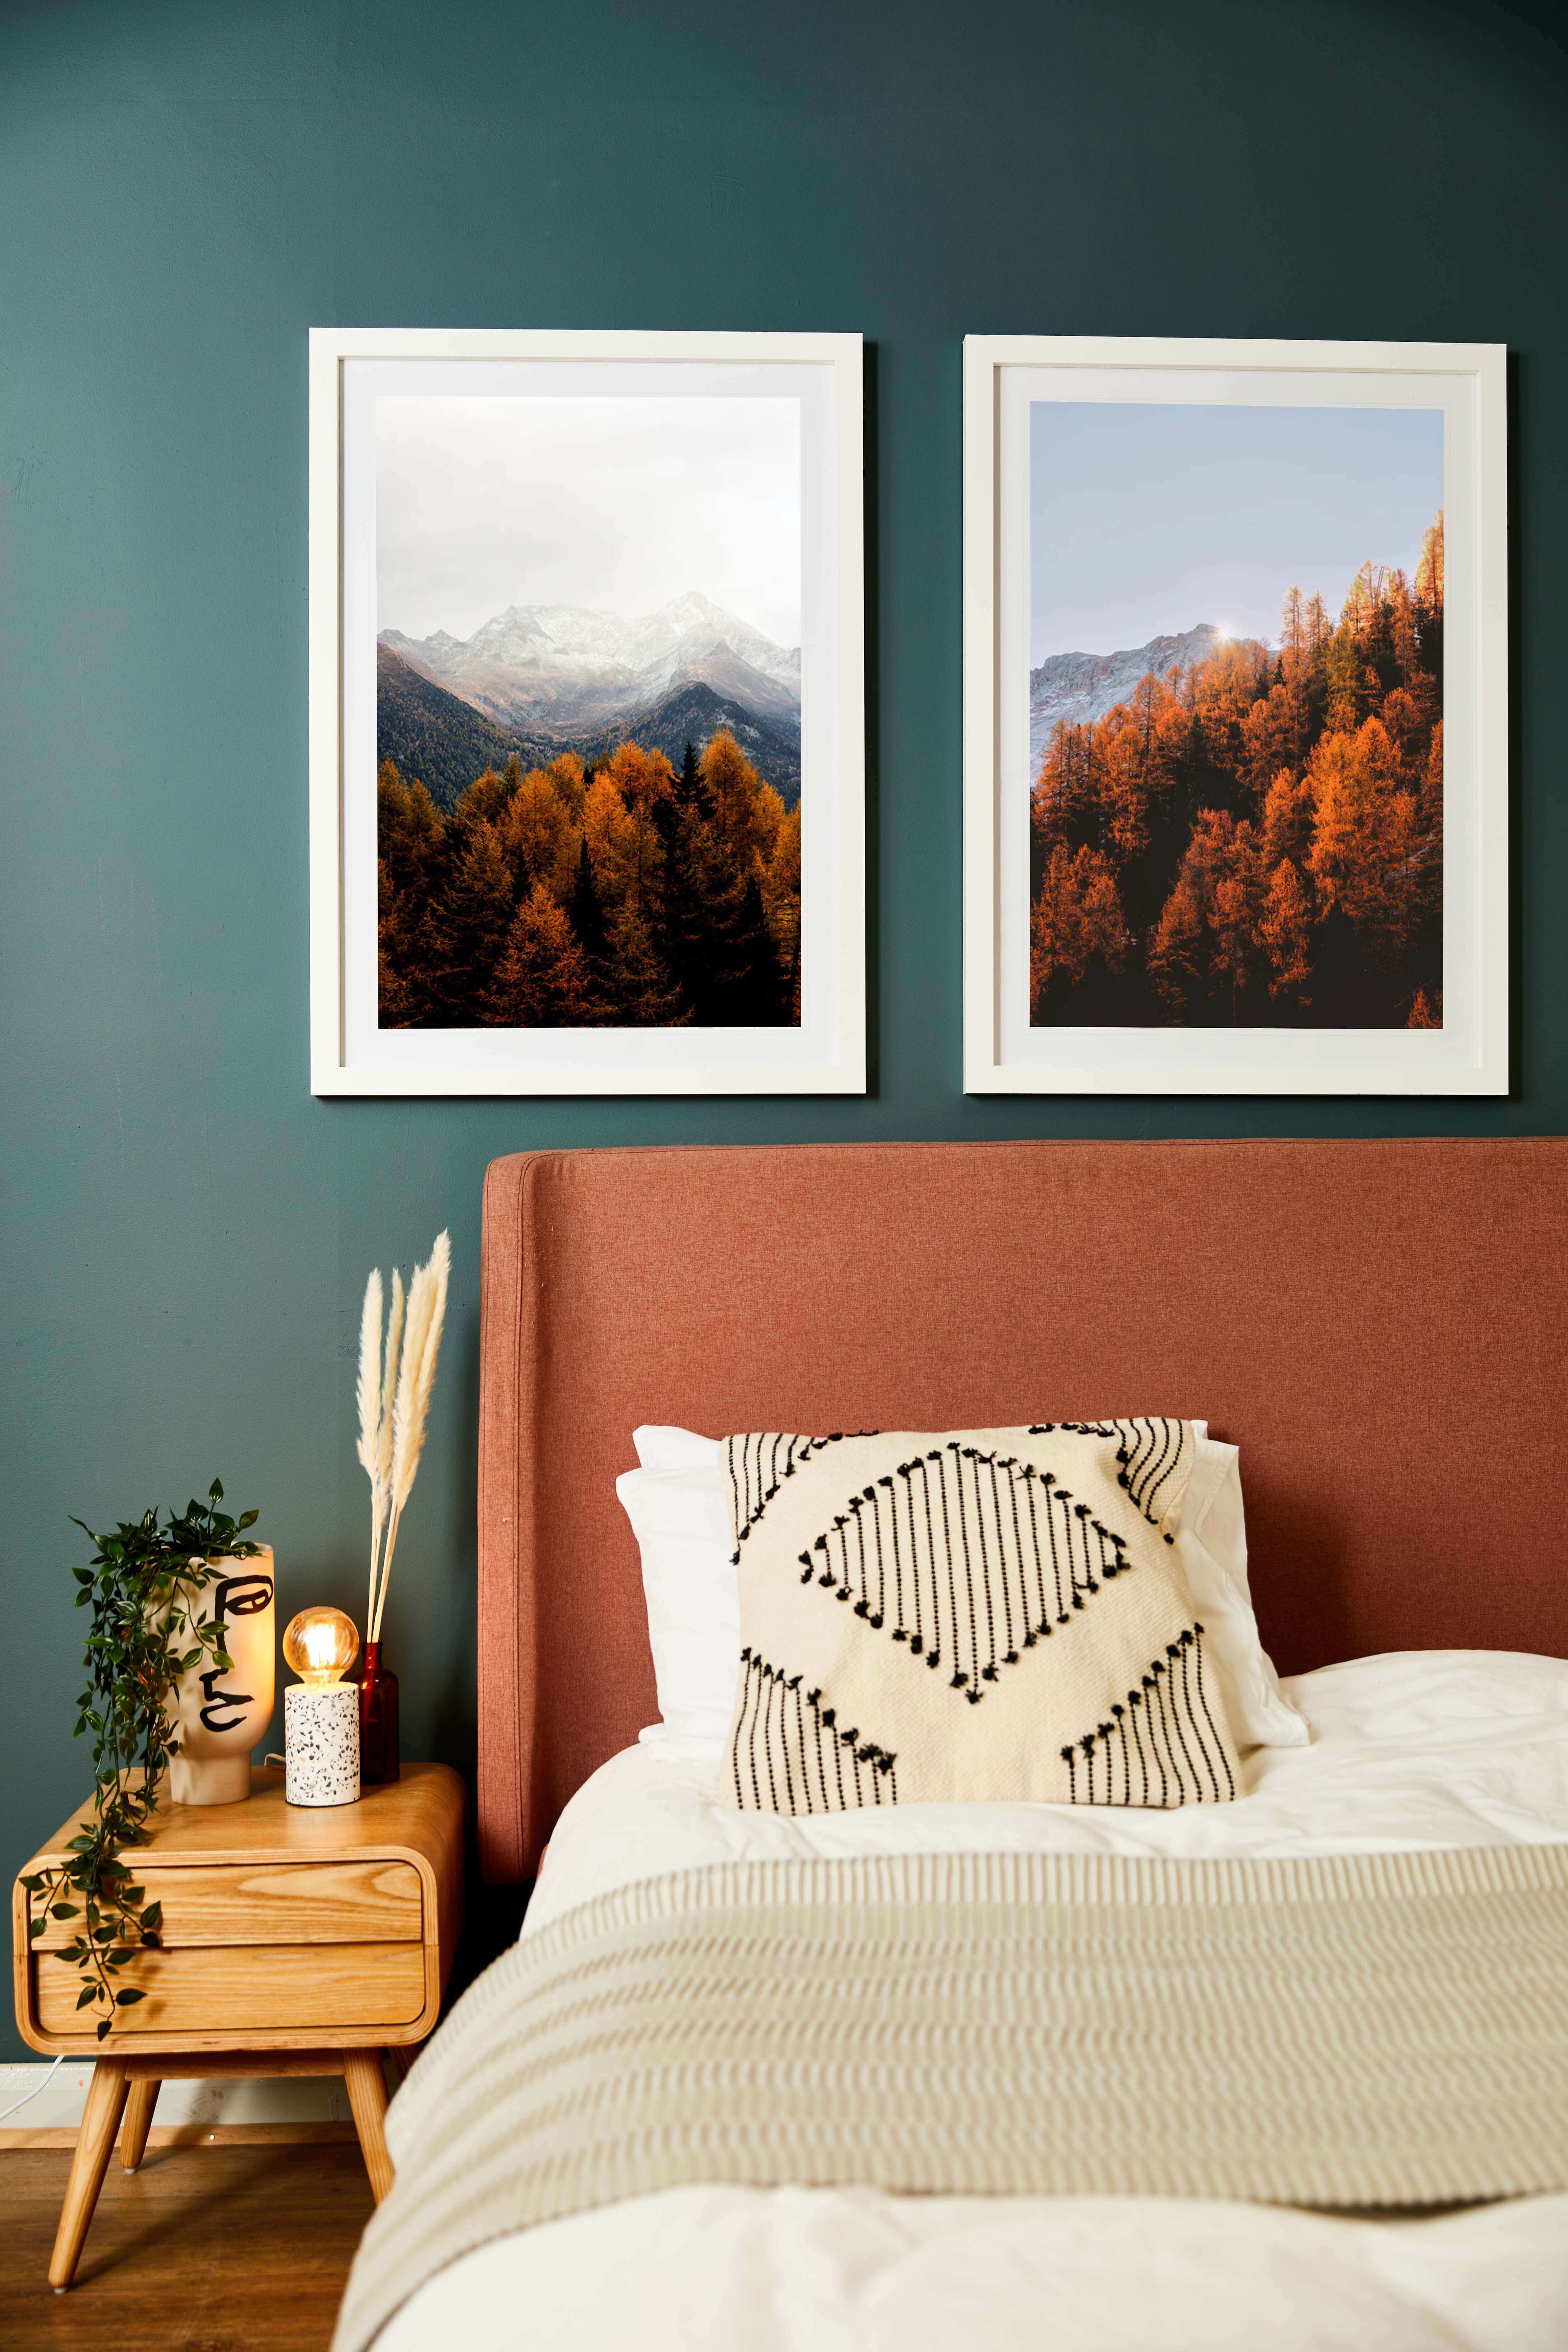 Home decor updated with the use of canvas prints and framed photos